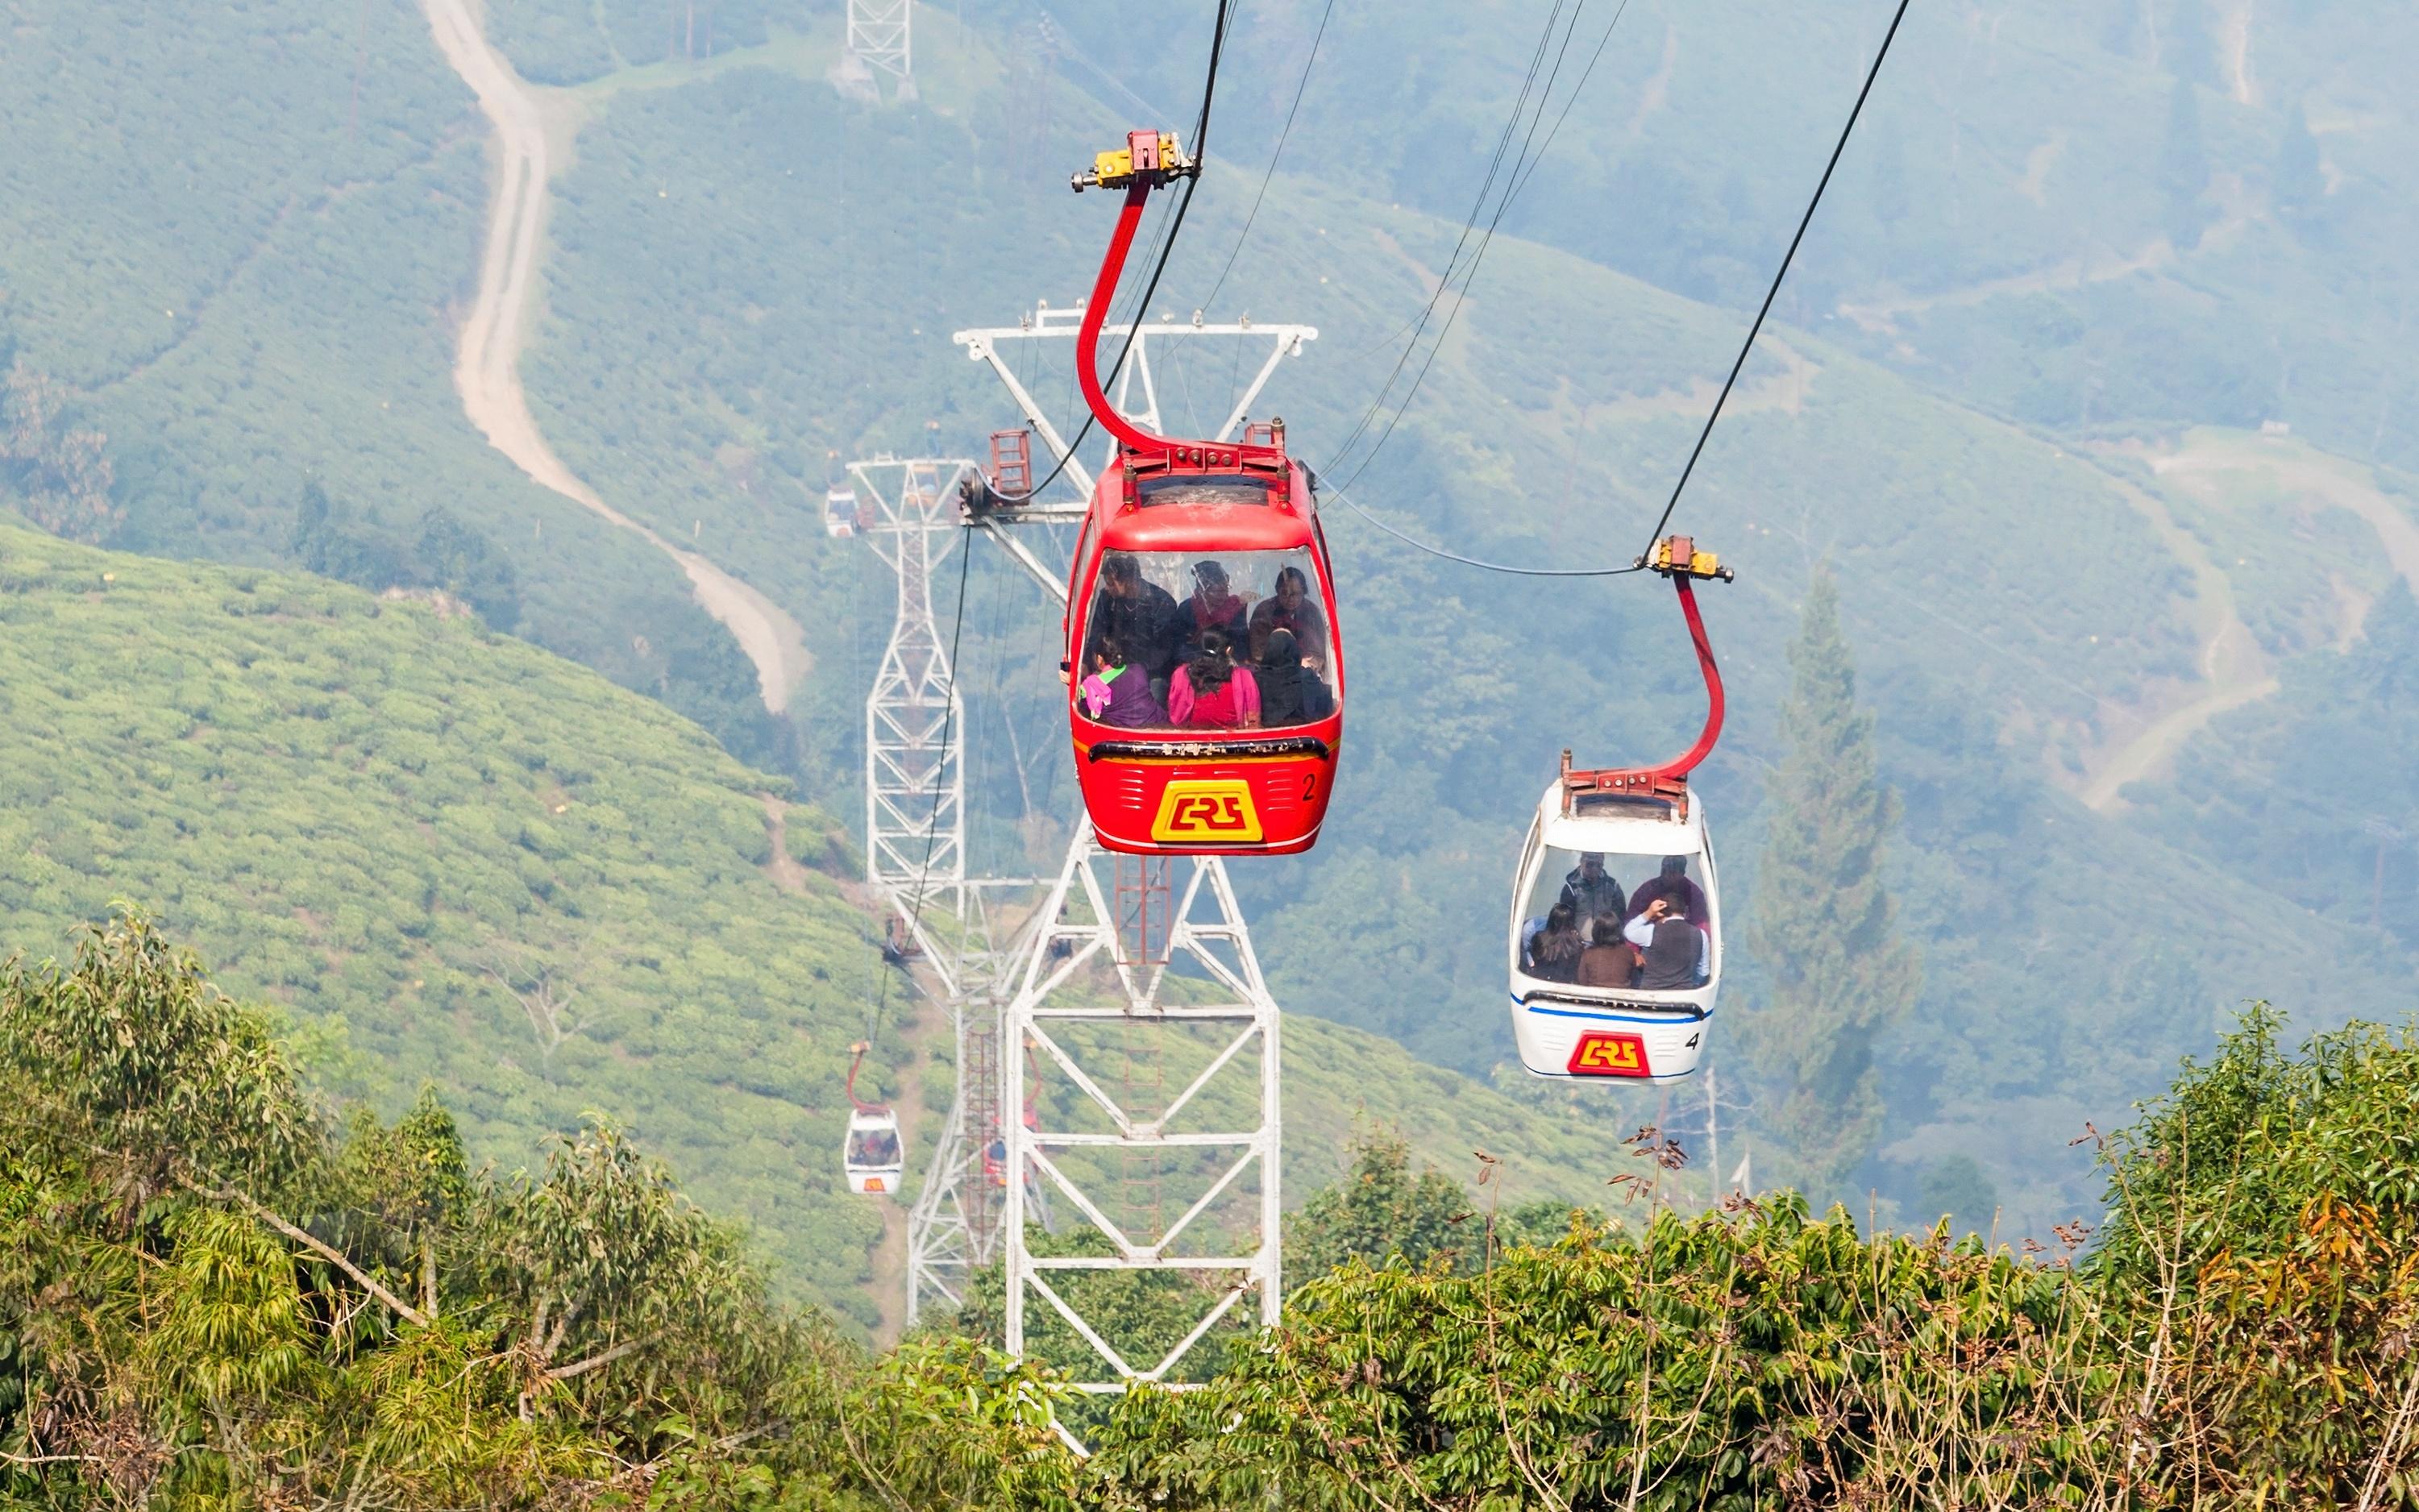 This will be first Indian city to start ropeway service in public transportation